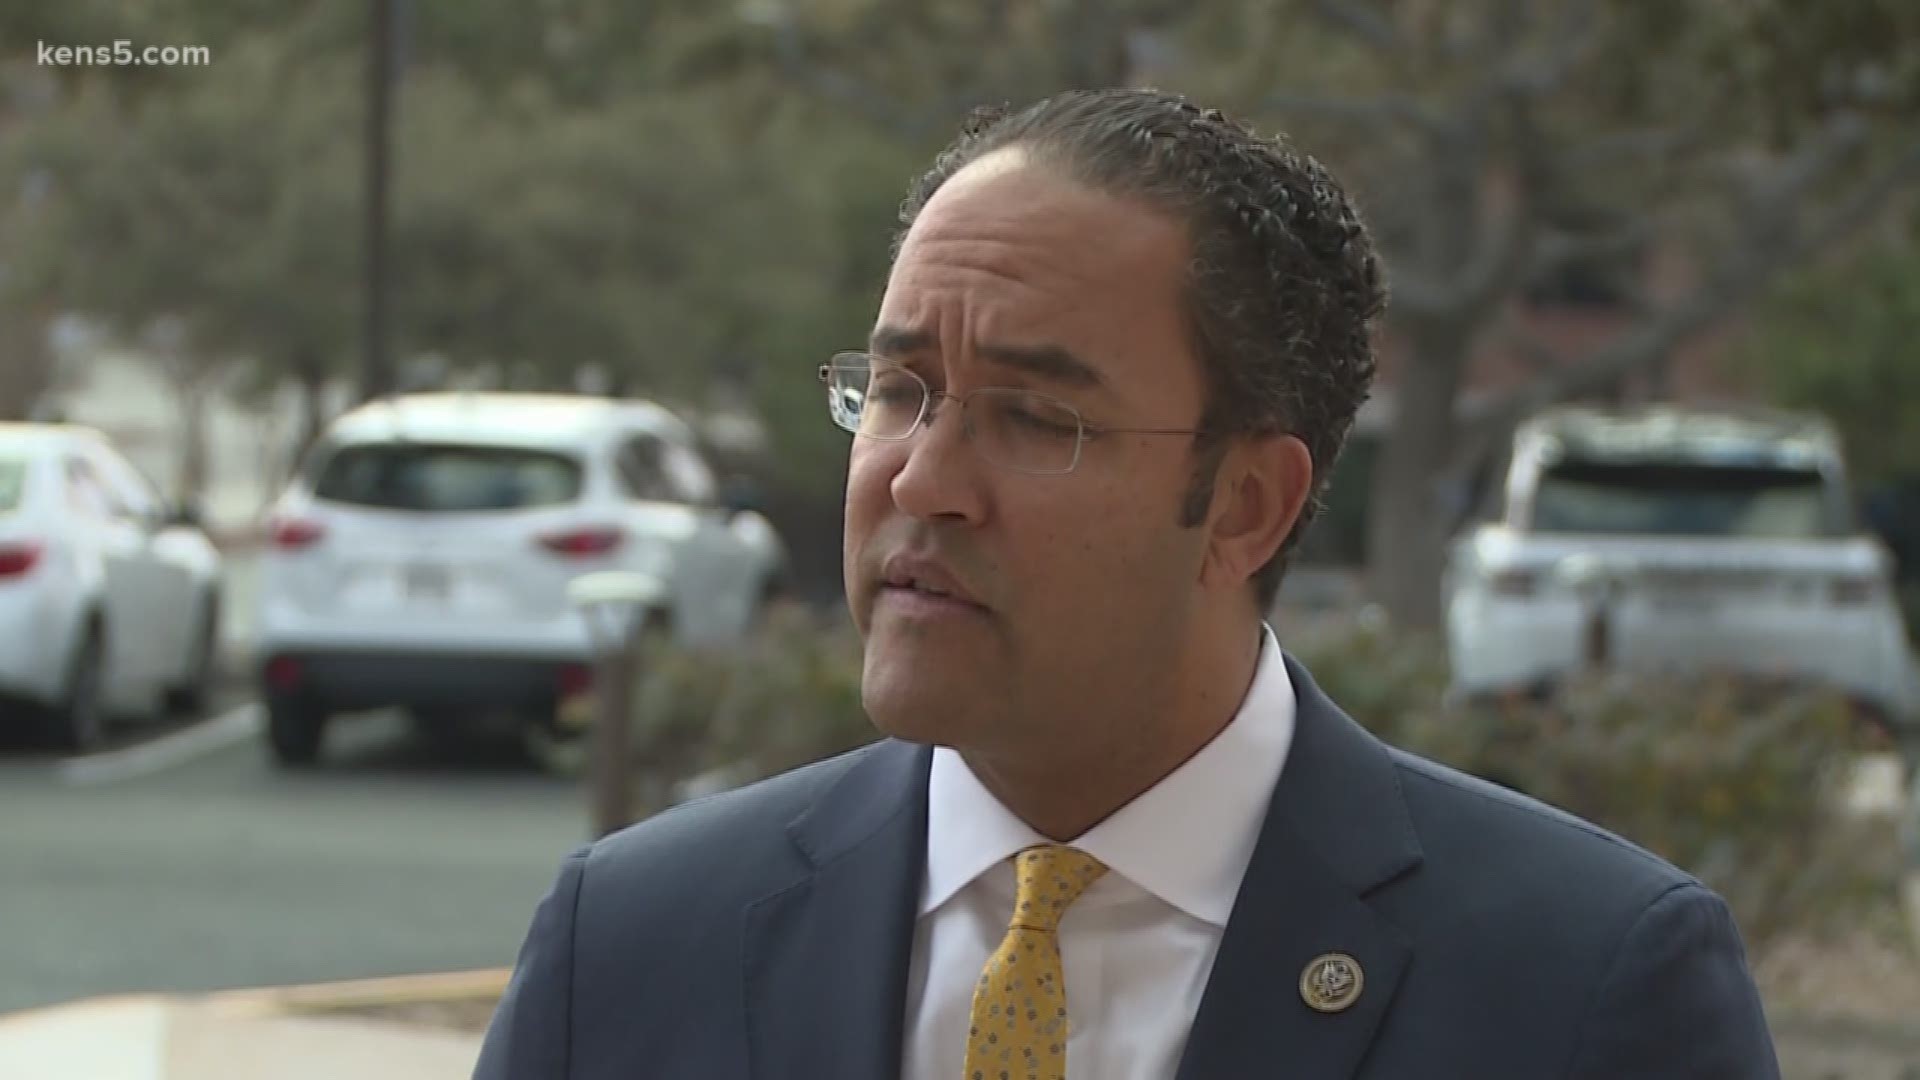 Will Hurd has 17 months months left to preside over the 23rd Congressional District of Texas, one of the most contentious in the country.